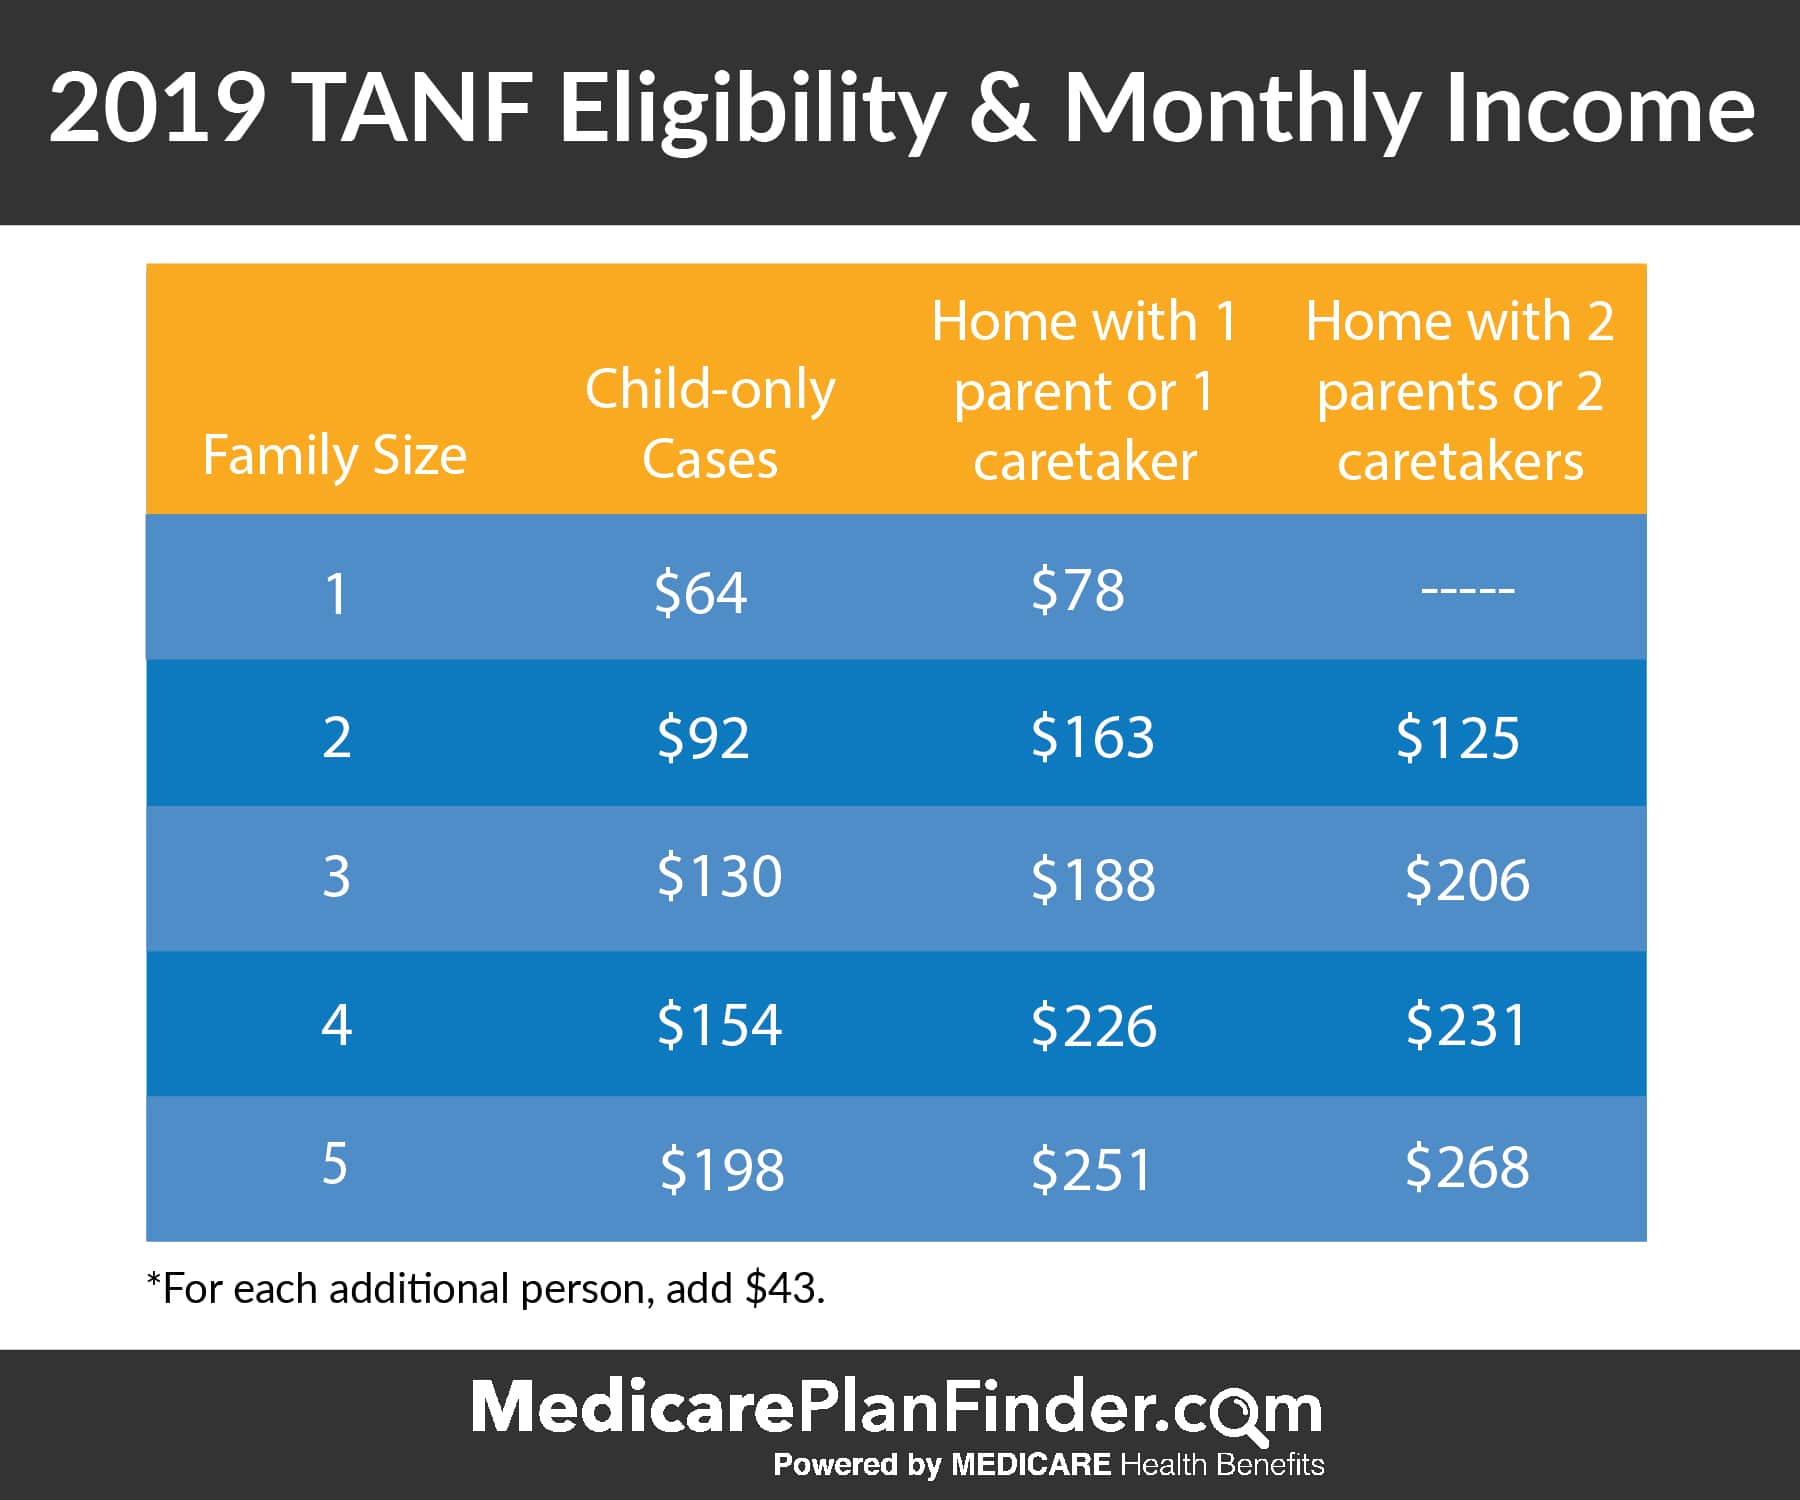 income chart for medicaid in texas - Part.tscoreks.org